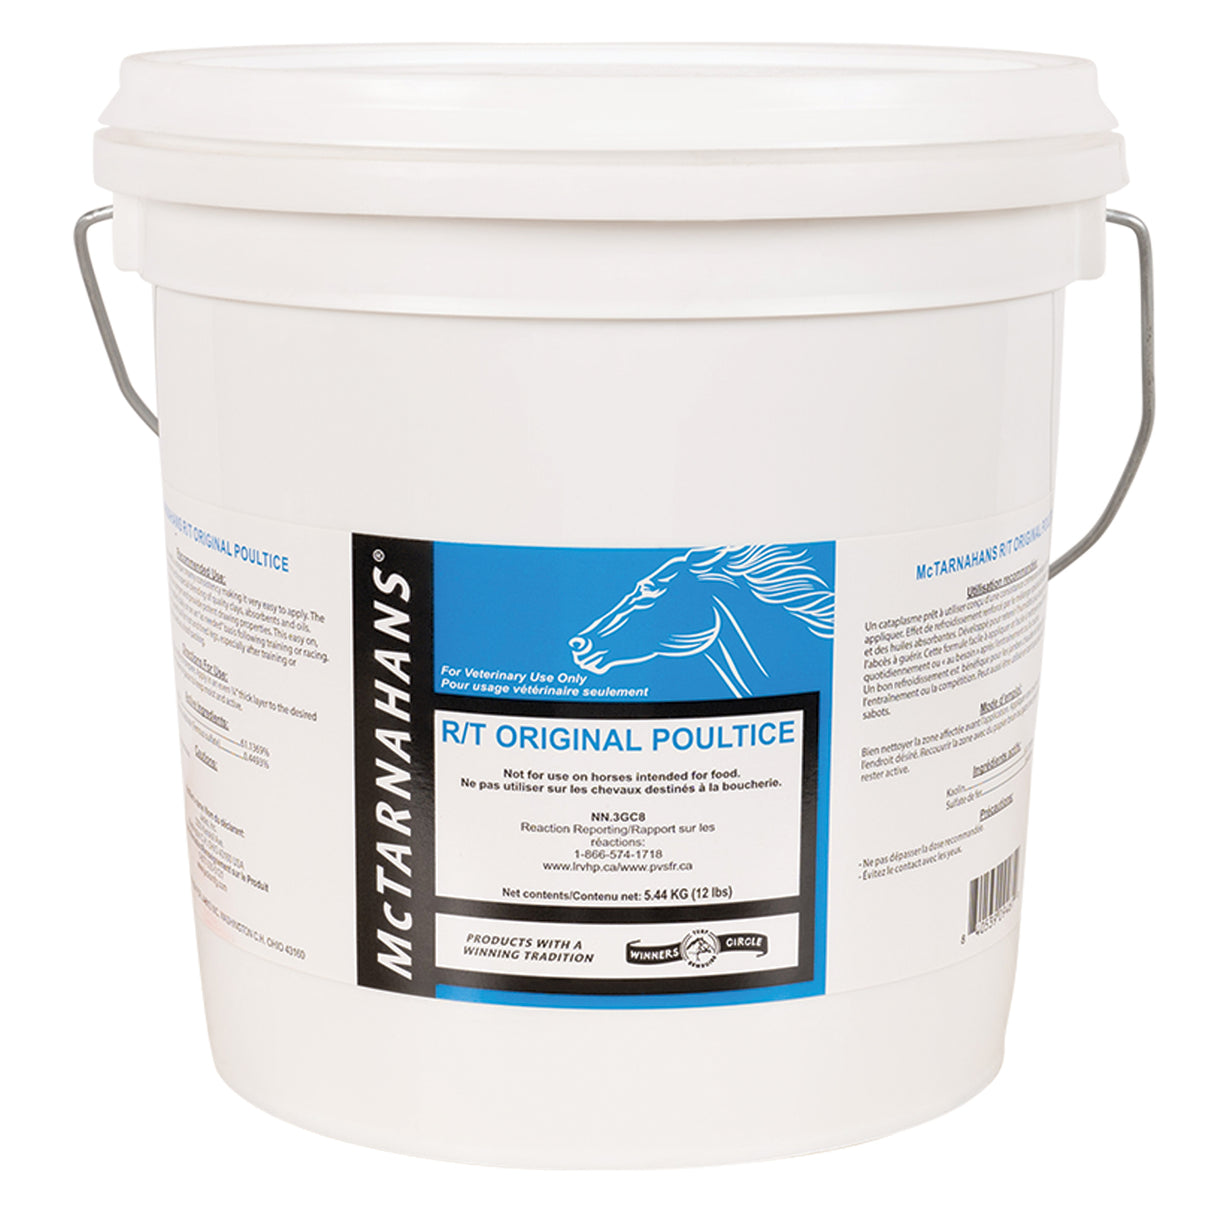 McTarnahans R-T Original Poultice 12 lbs.